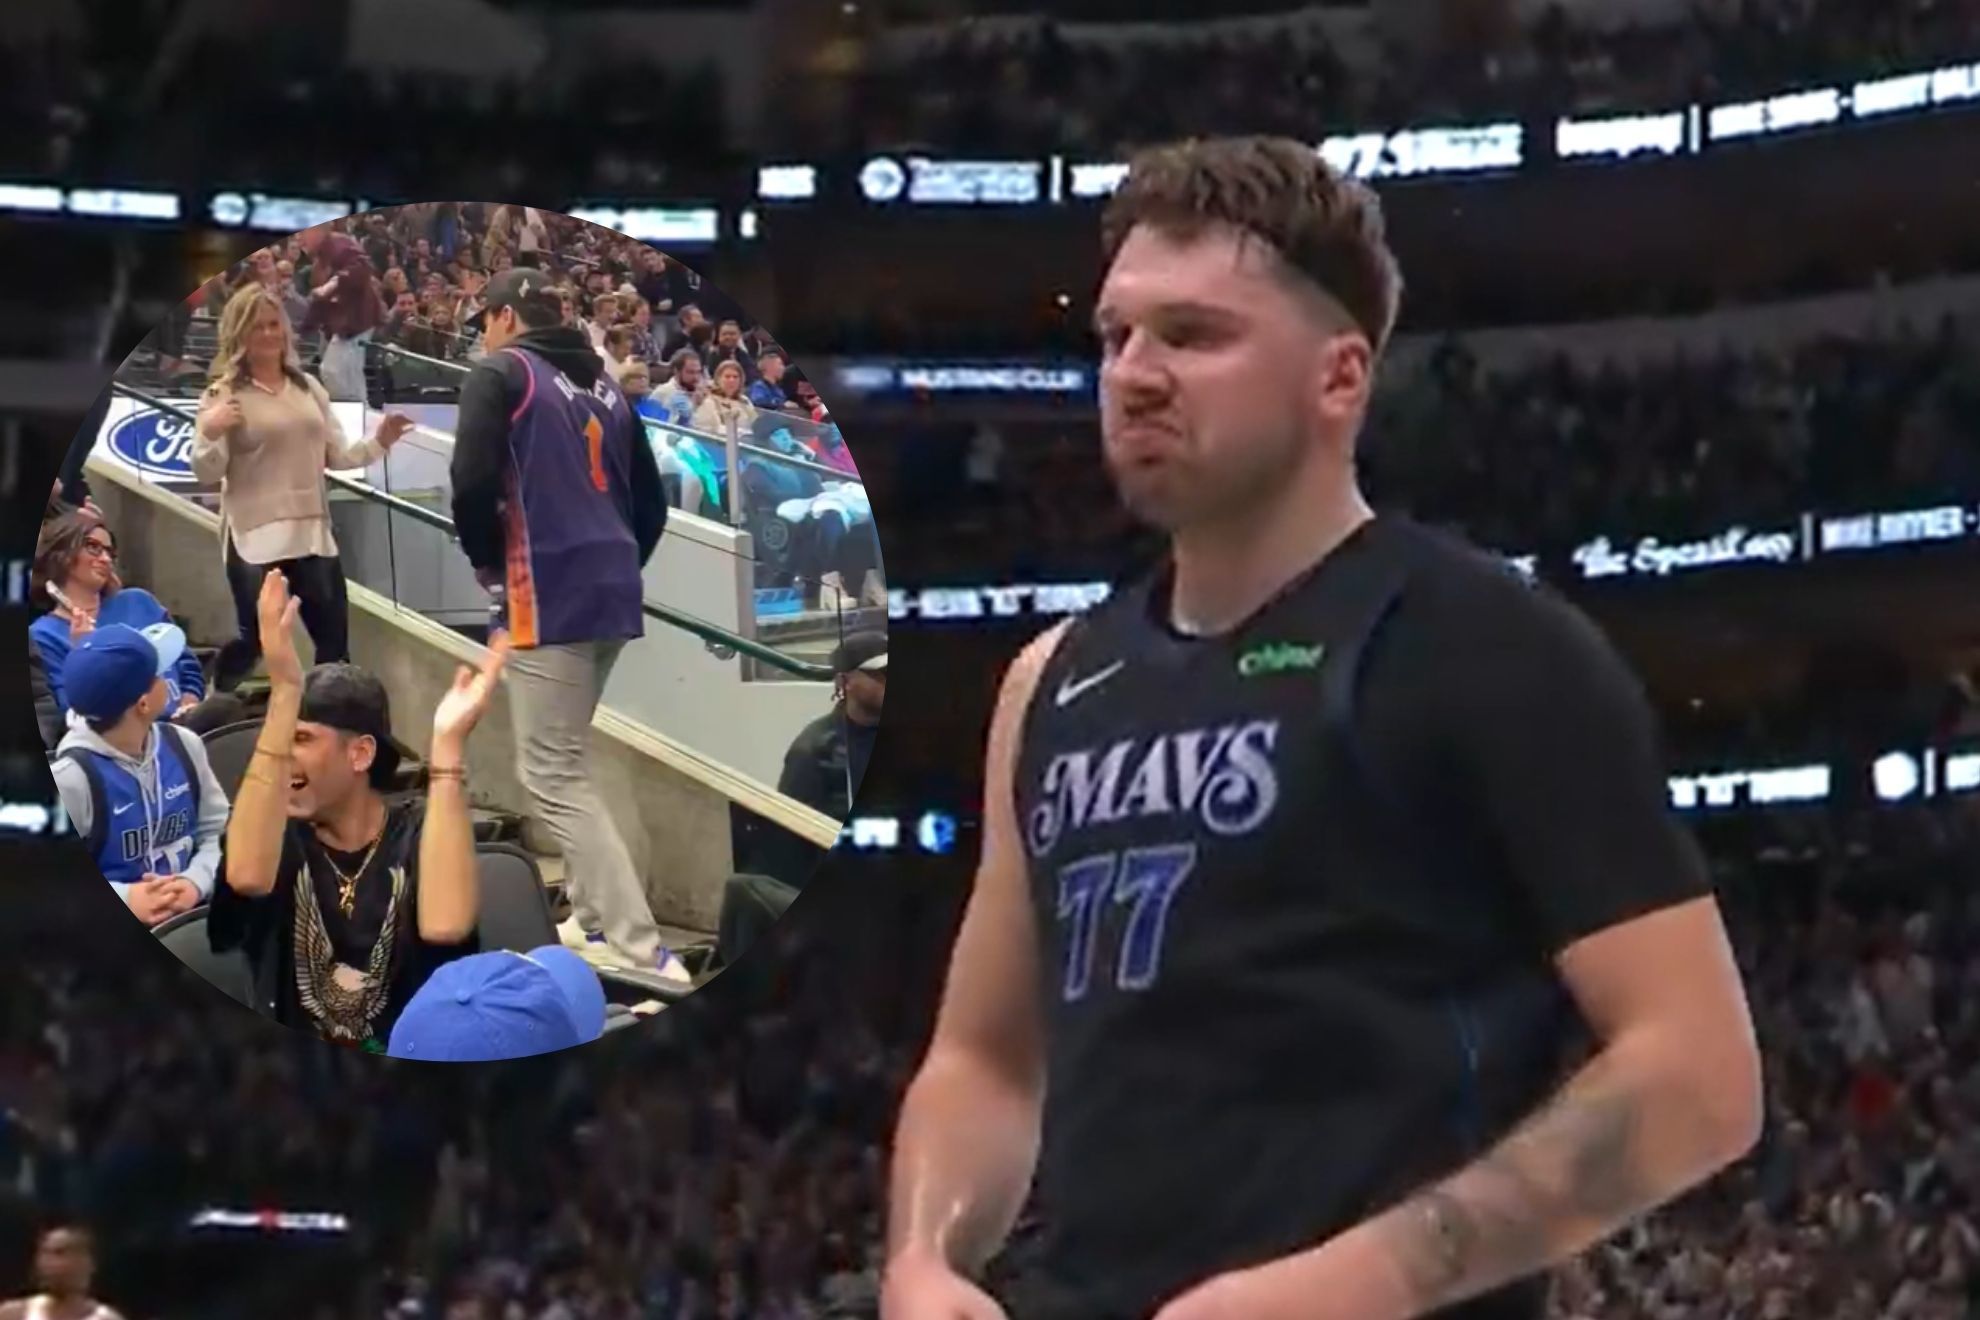 Dallas Mavericks star Luka Doncic asked security to kick out a fan that heckled him on Wednesday night.